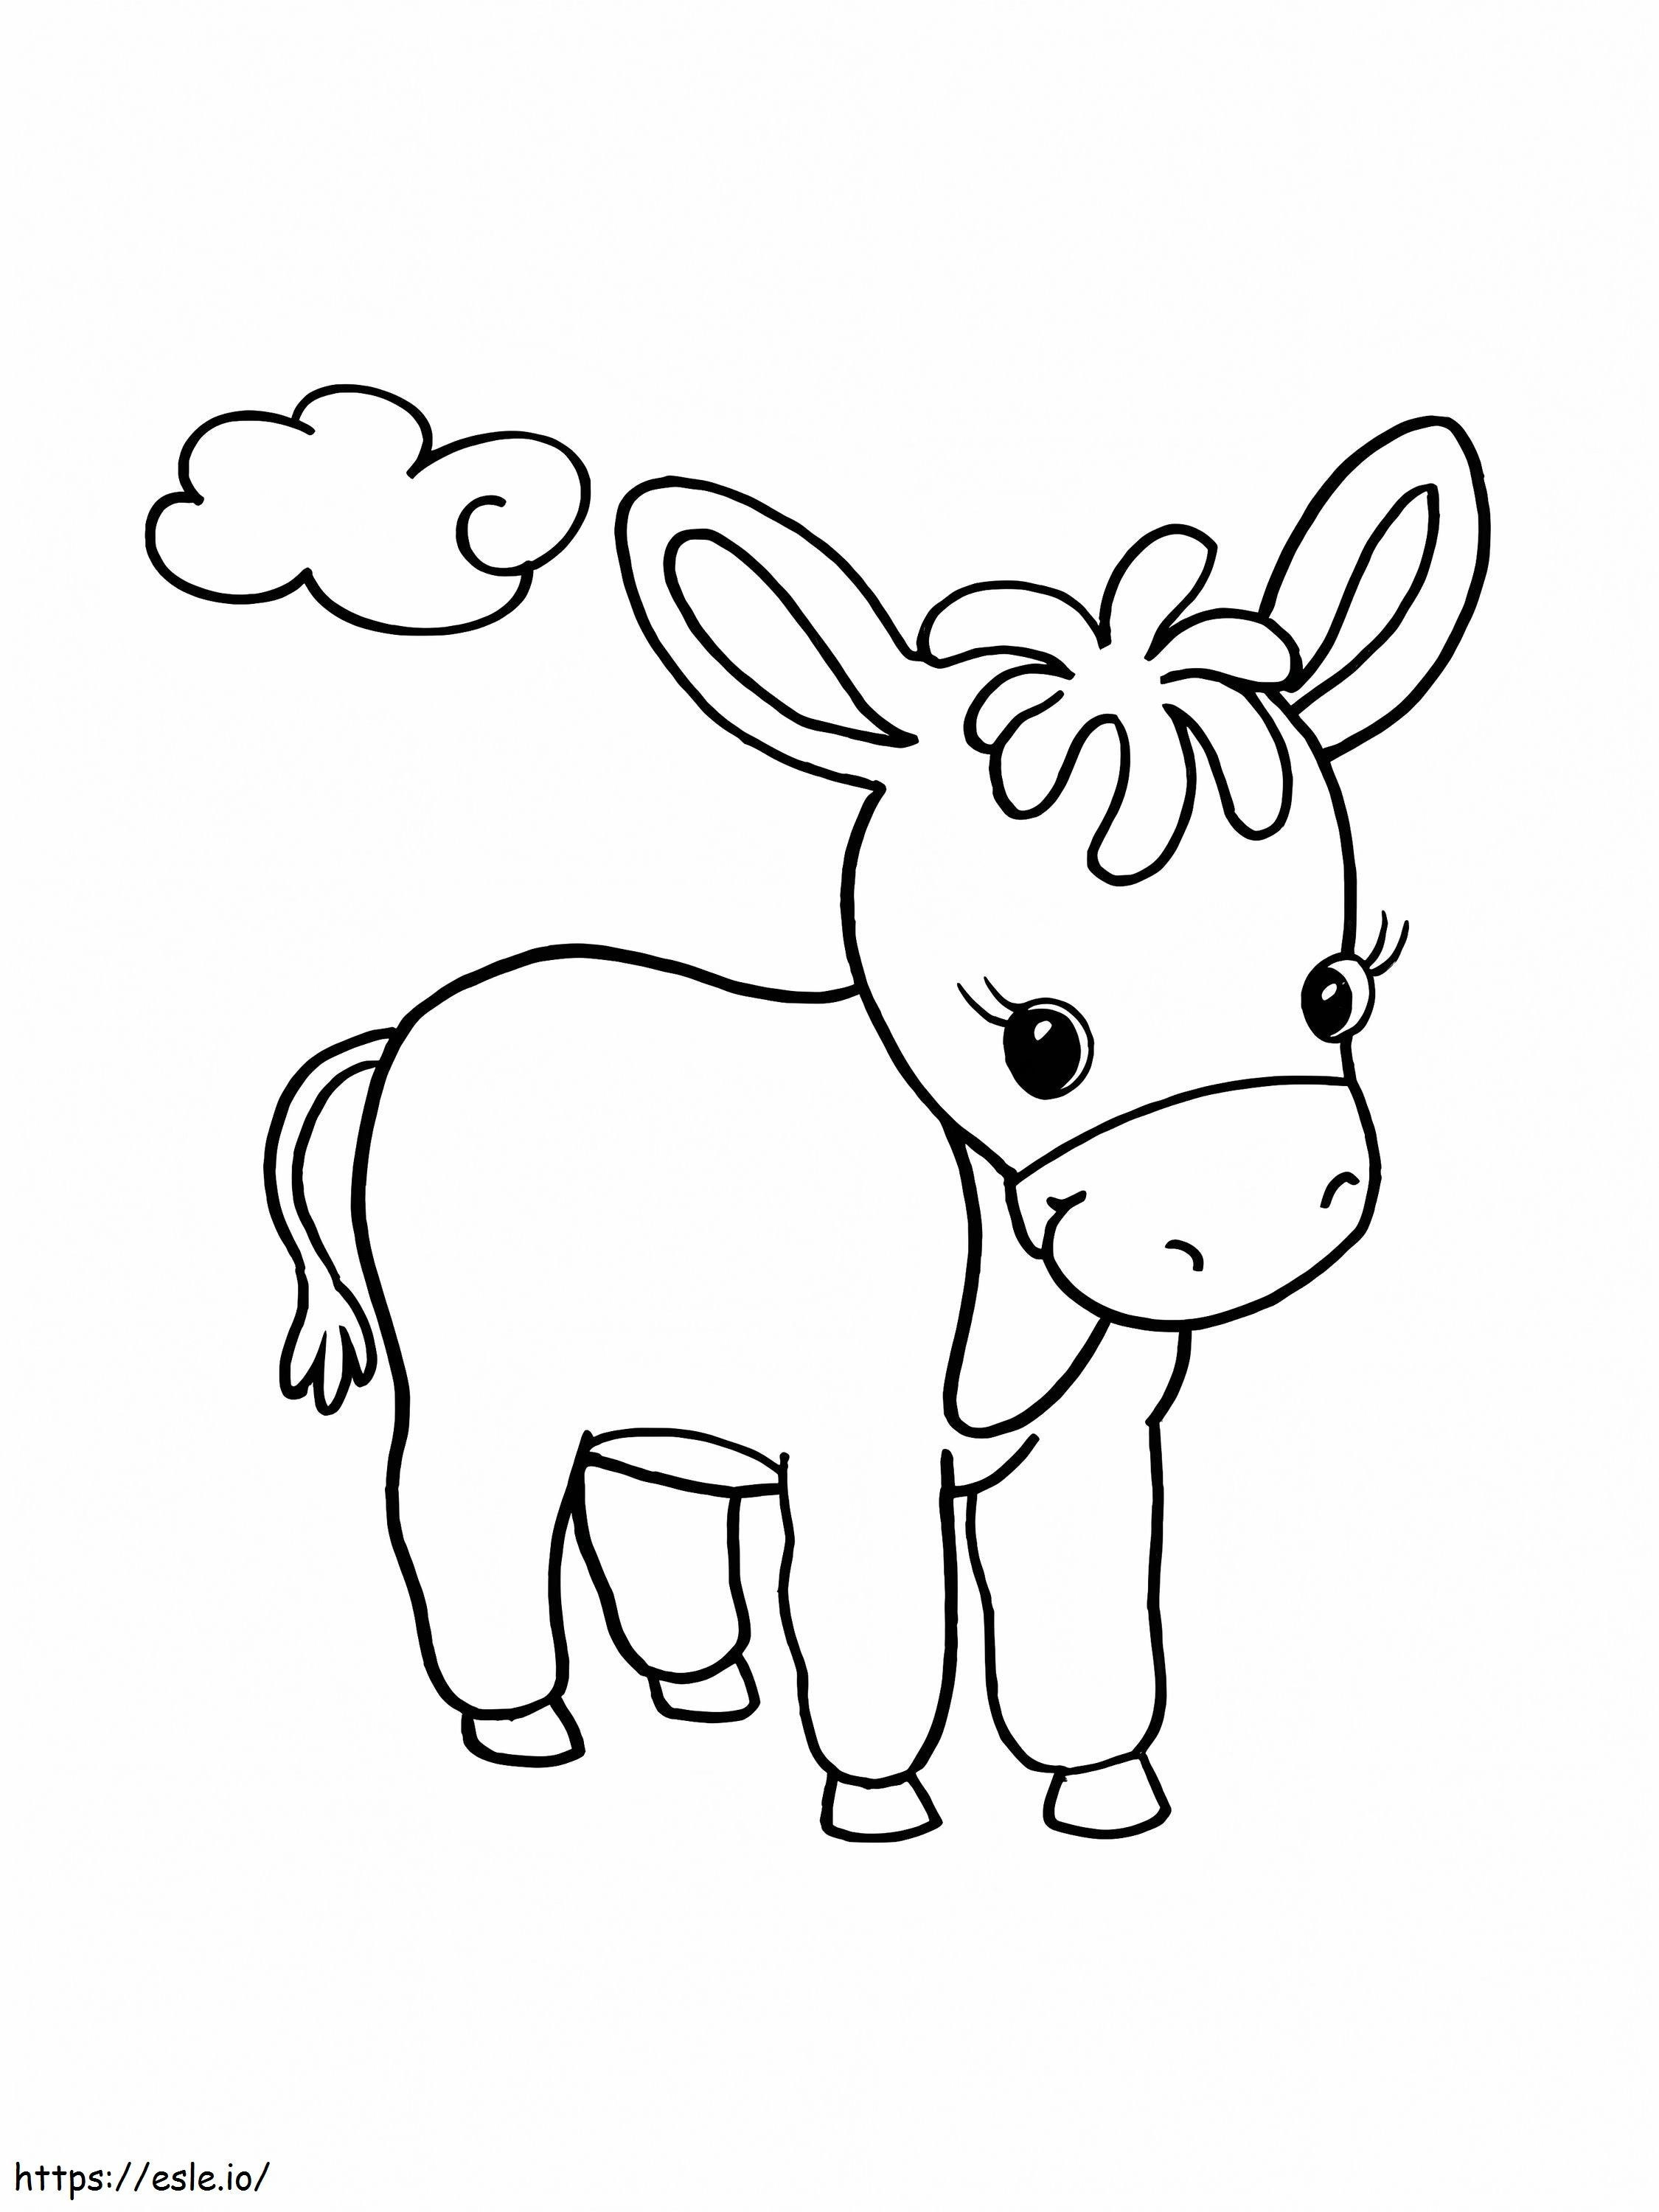 Baby Donkey With Cloud coloring page